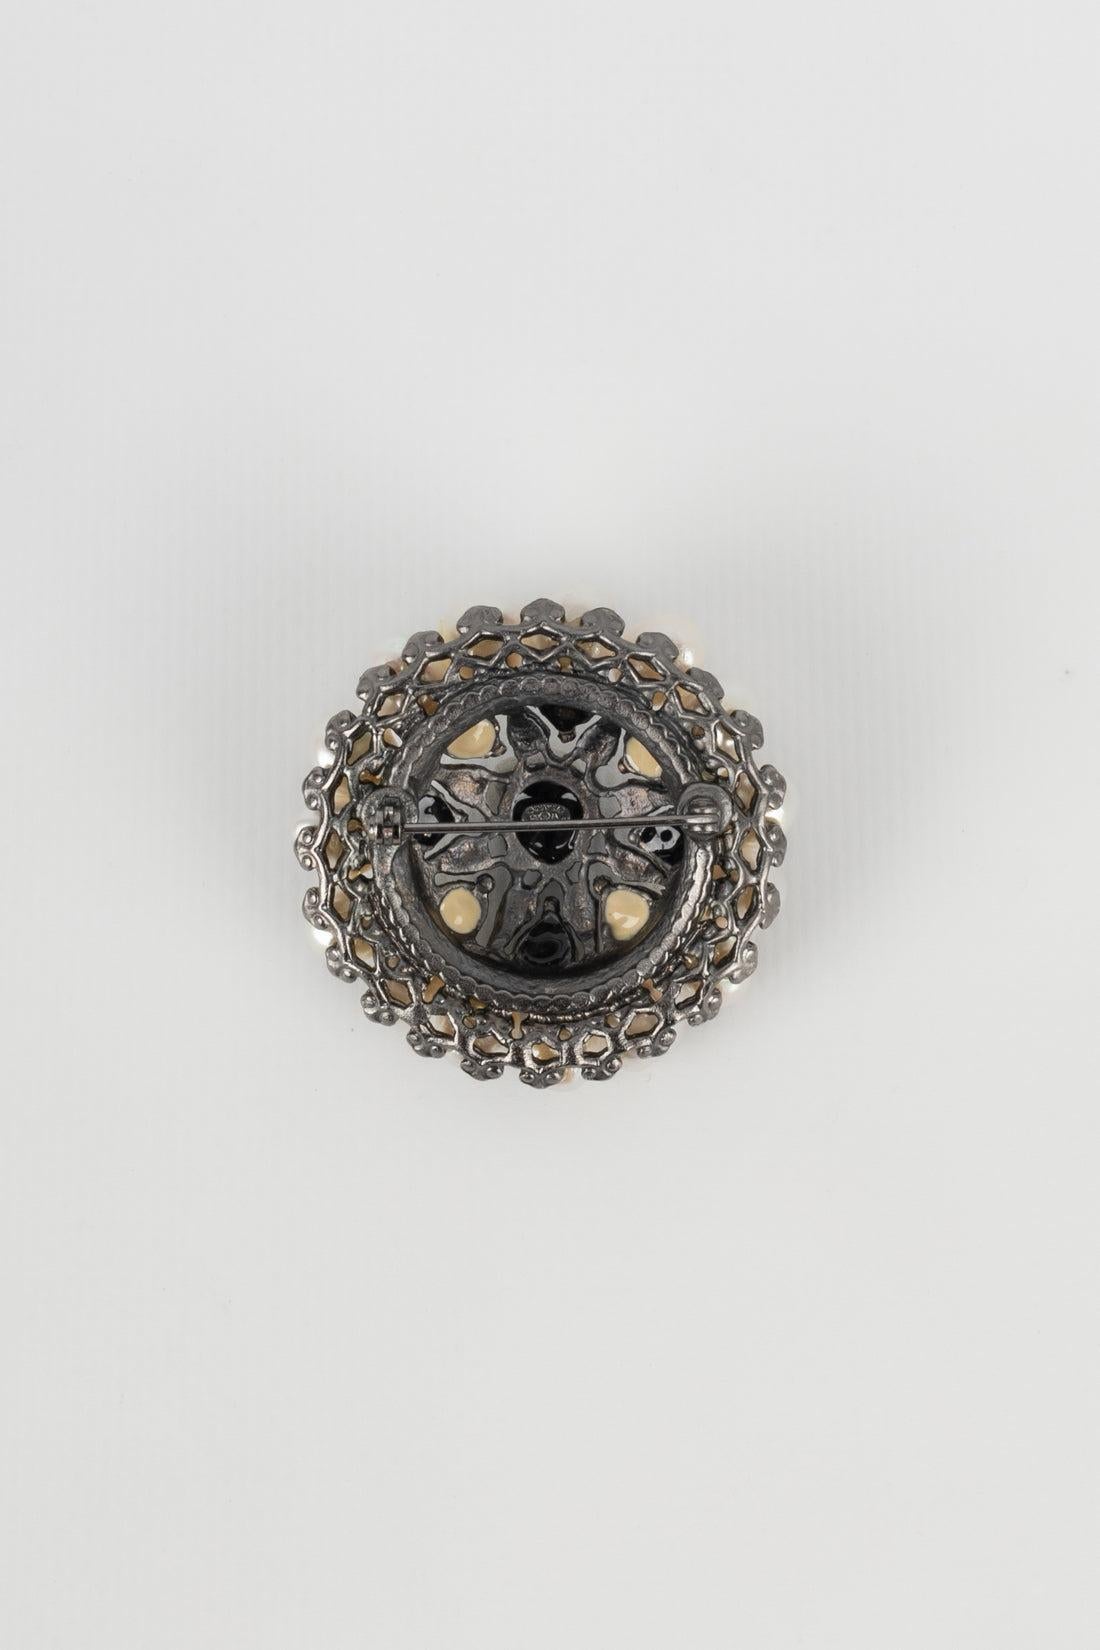 Chanel - (Made in France)Dark silvery metal brooch with resin and costume pearls. Fall-Winter 2009 Collection.

Additional information:
Condition: Very good condition
Dimensions: Height: 5 cm
Period: 21st Century

Seller Reference: BRB128
